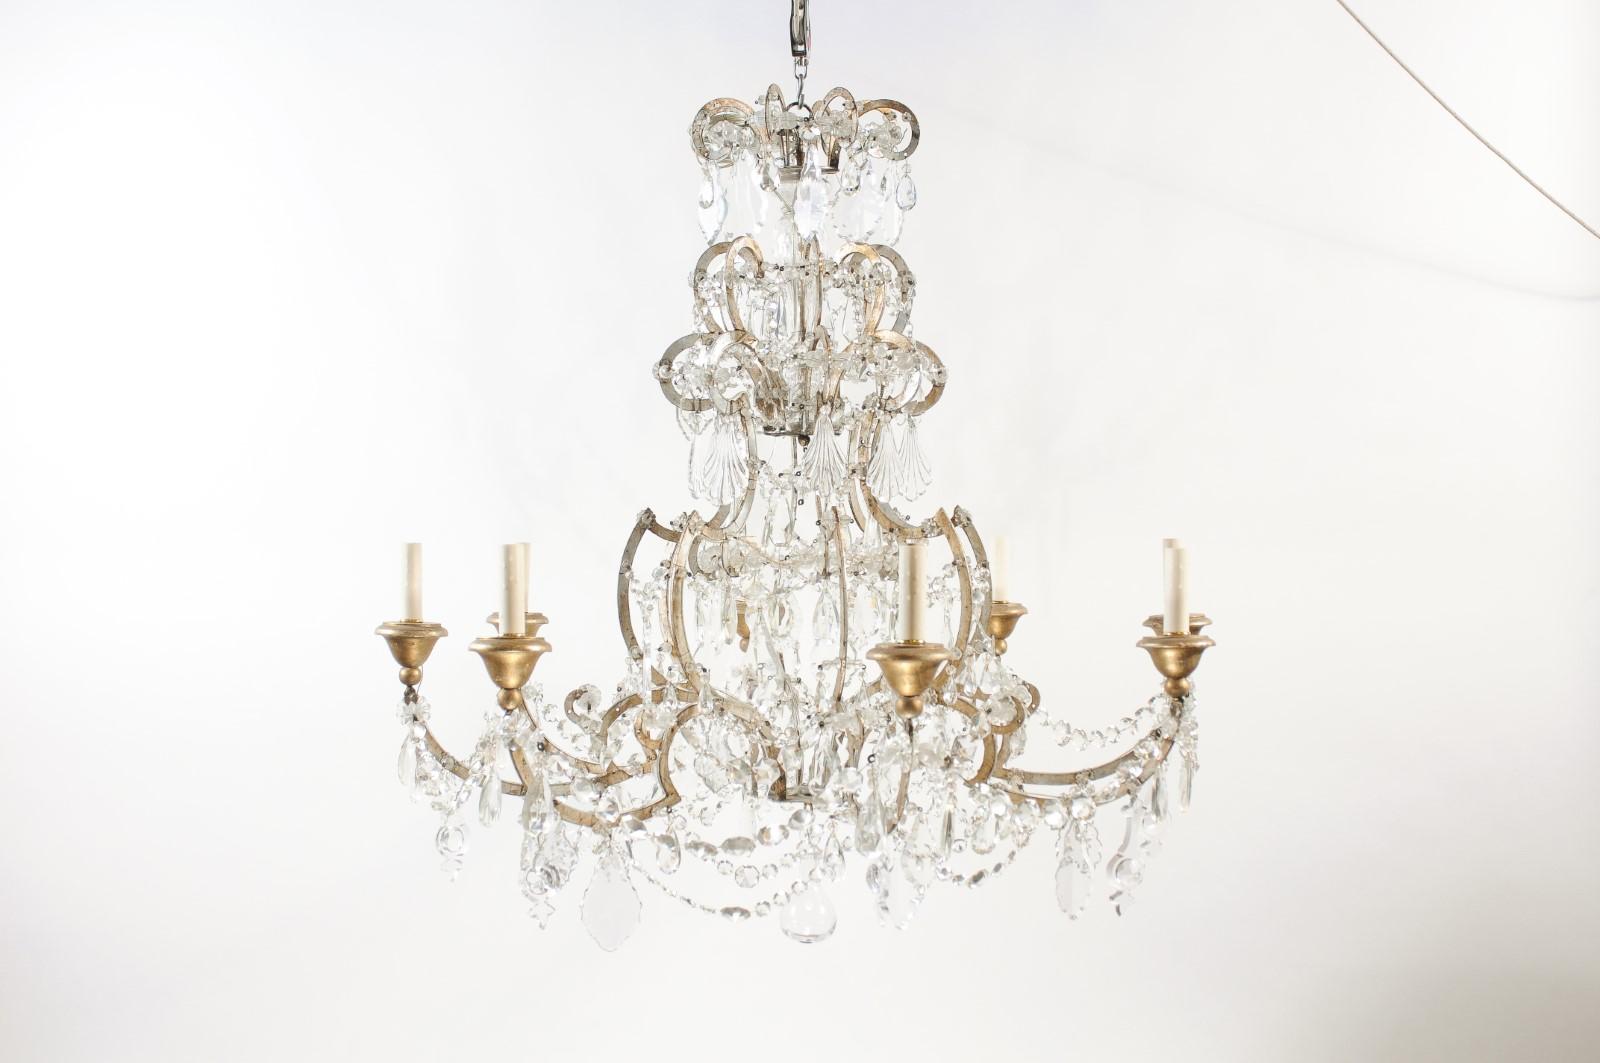 Italian Crystal & Silvered Wood Chandelier with 8 Lights, 19th Century For Sale 1